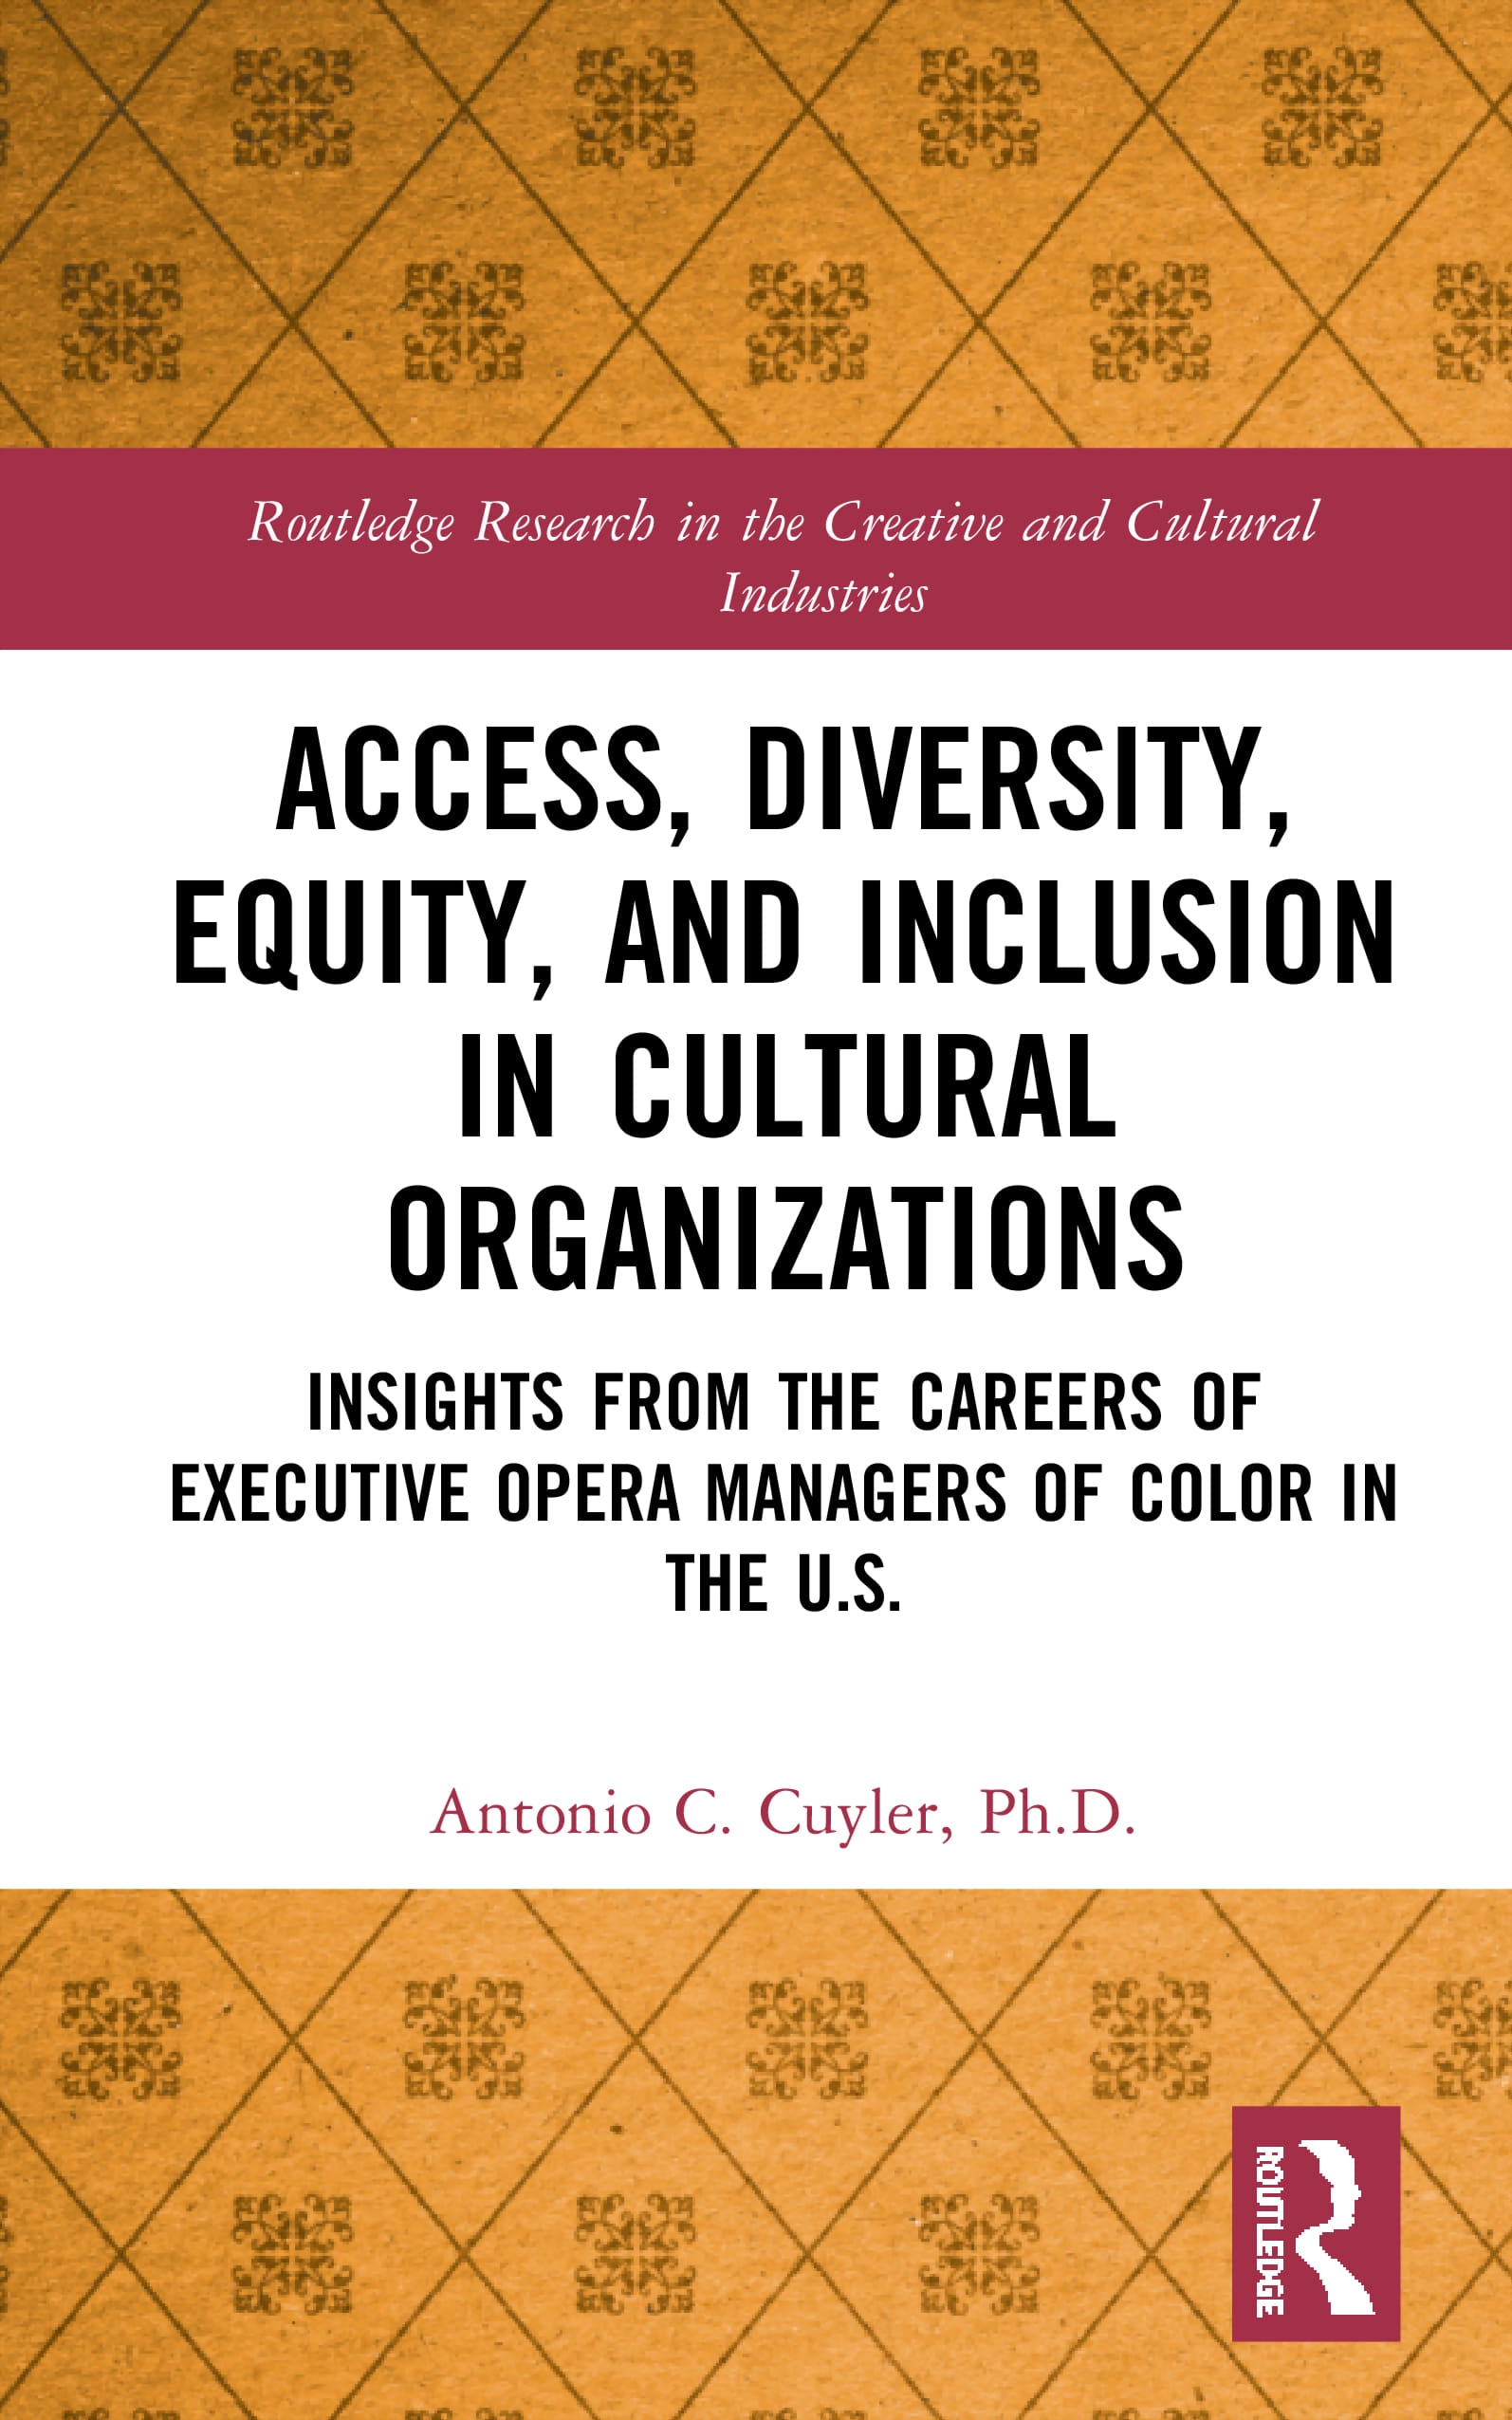 Access, Diversity, Equity and Inclusion in Cultural Organizations: Insights from the Careers of Executive Opera Managers of Color in the Us